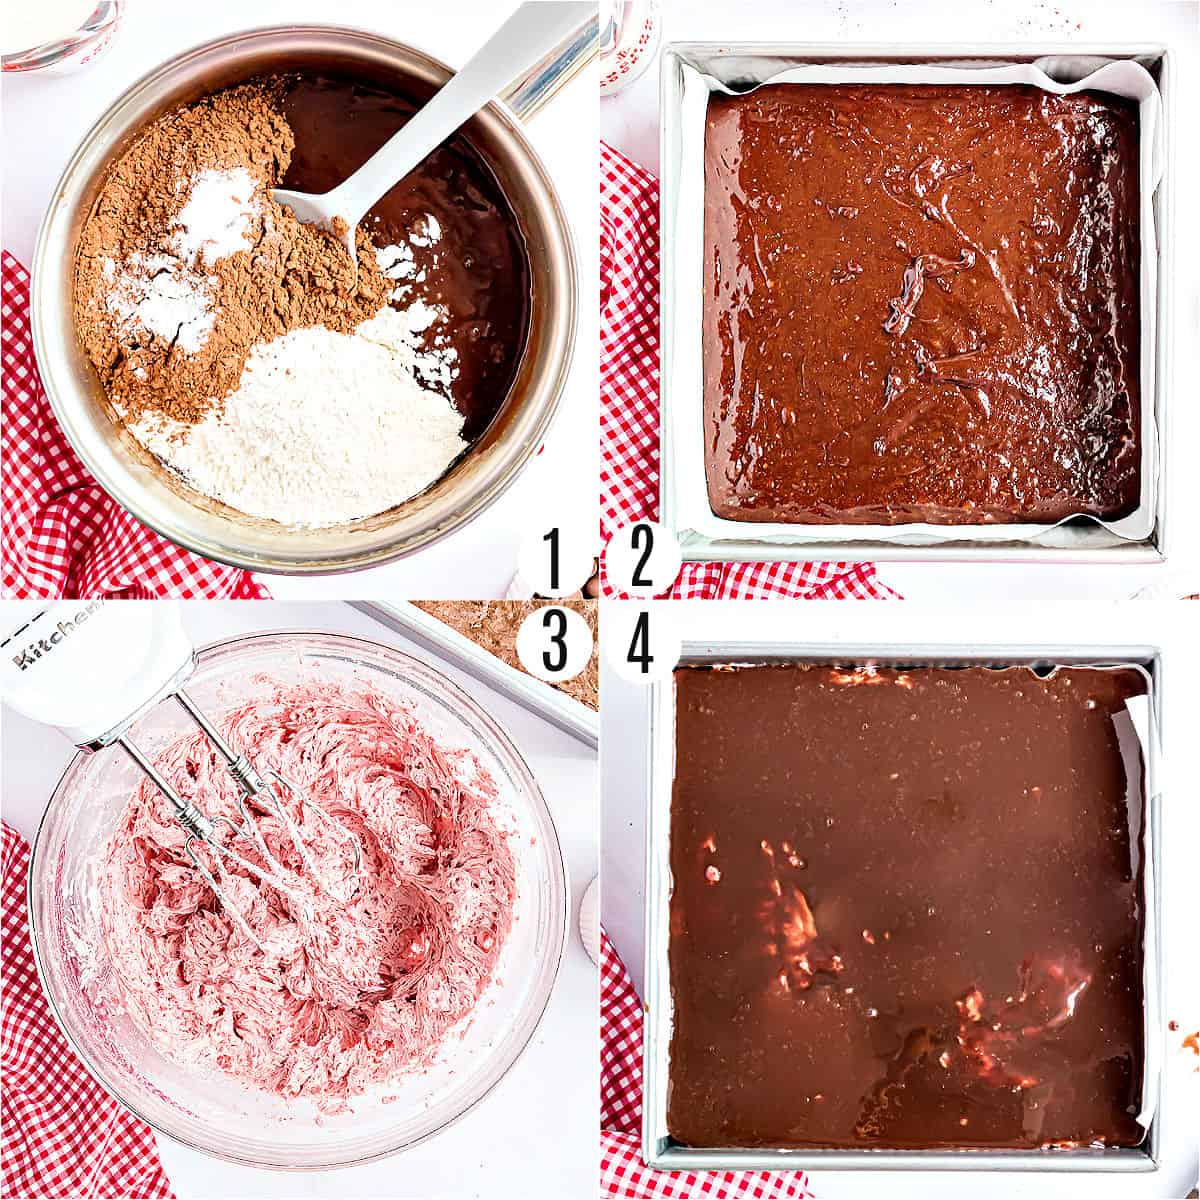 Step by step photos showing how to make strawberry brownies.